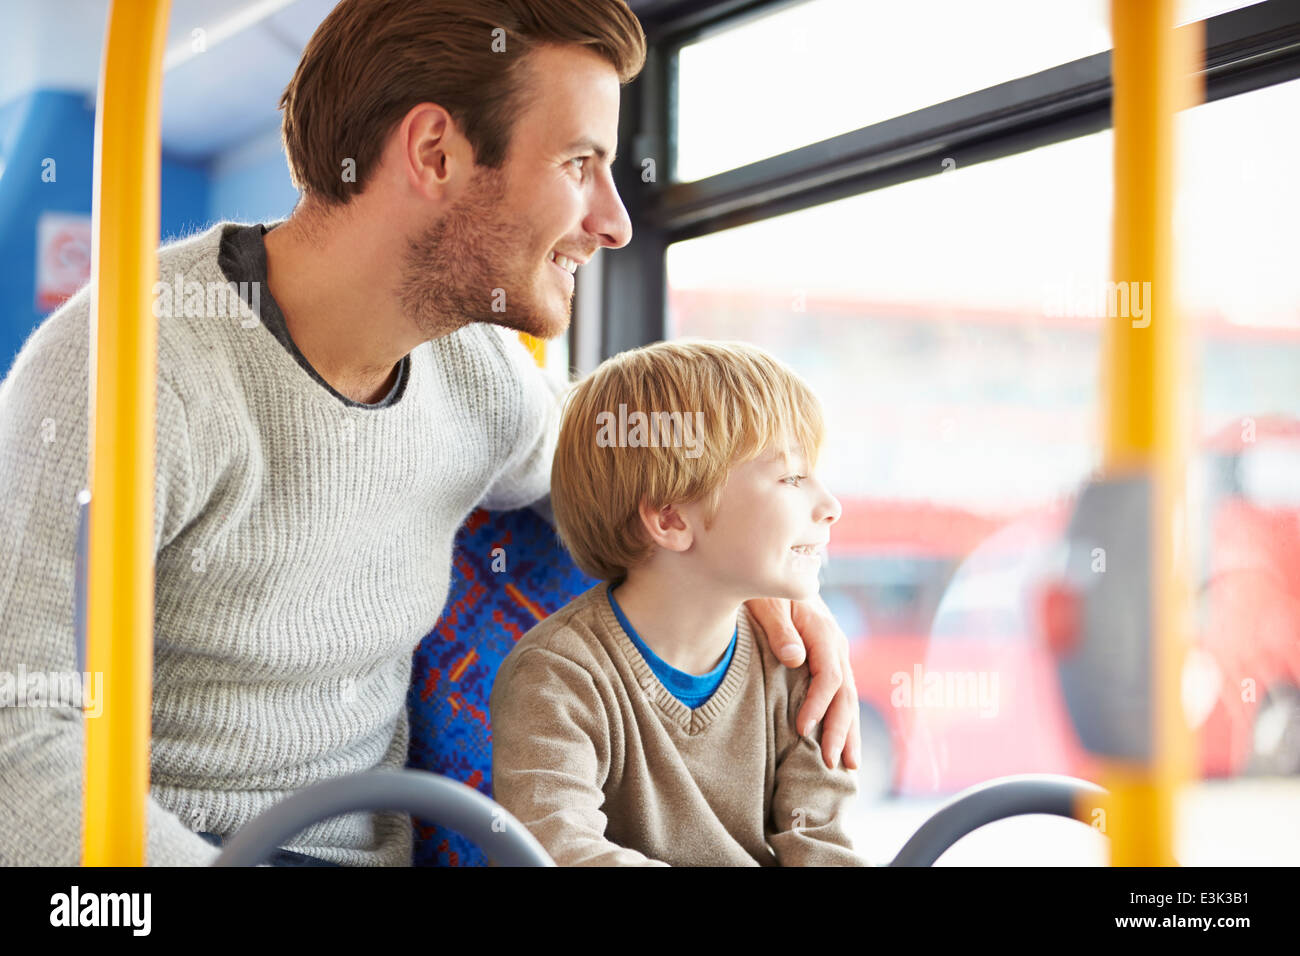 Father And Son Enjoying Bus Journey Together Stock Photo